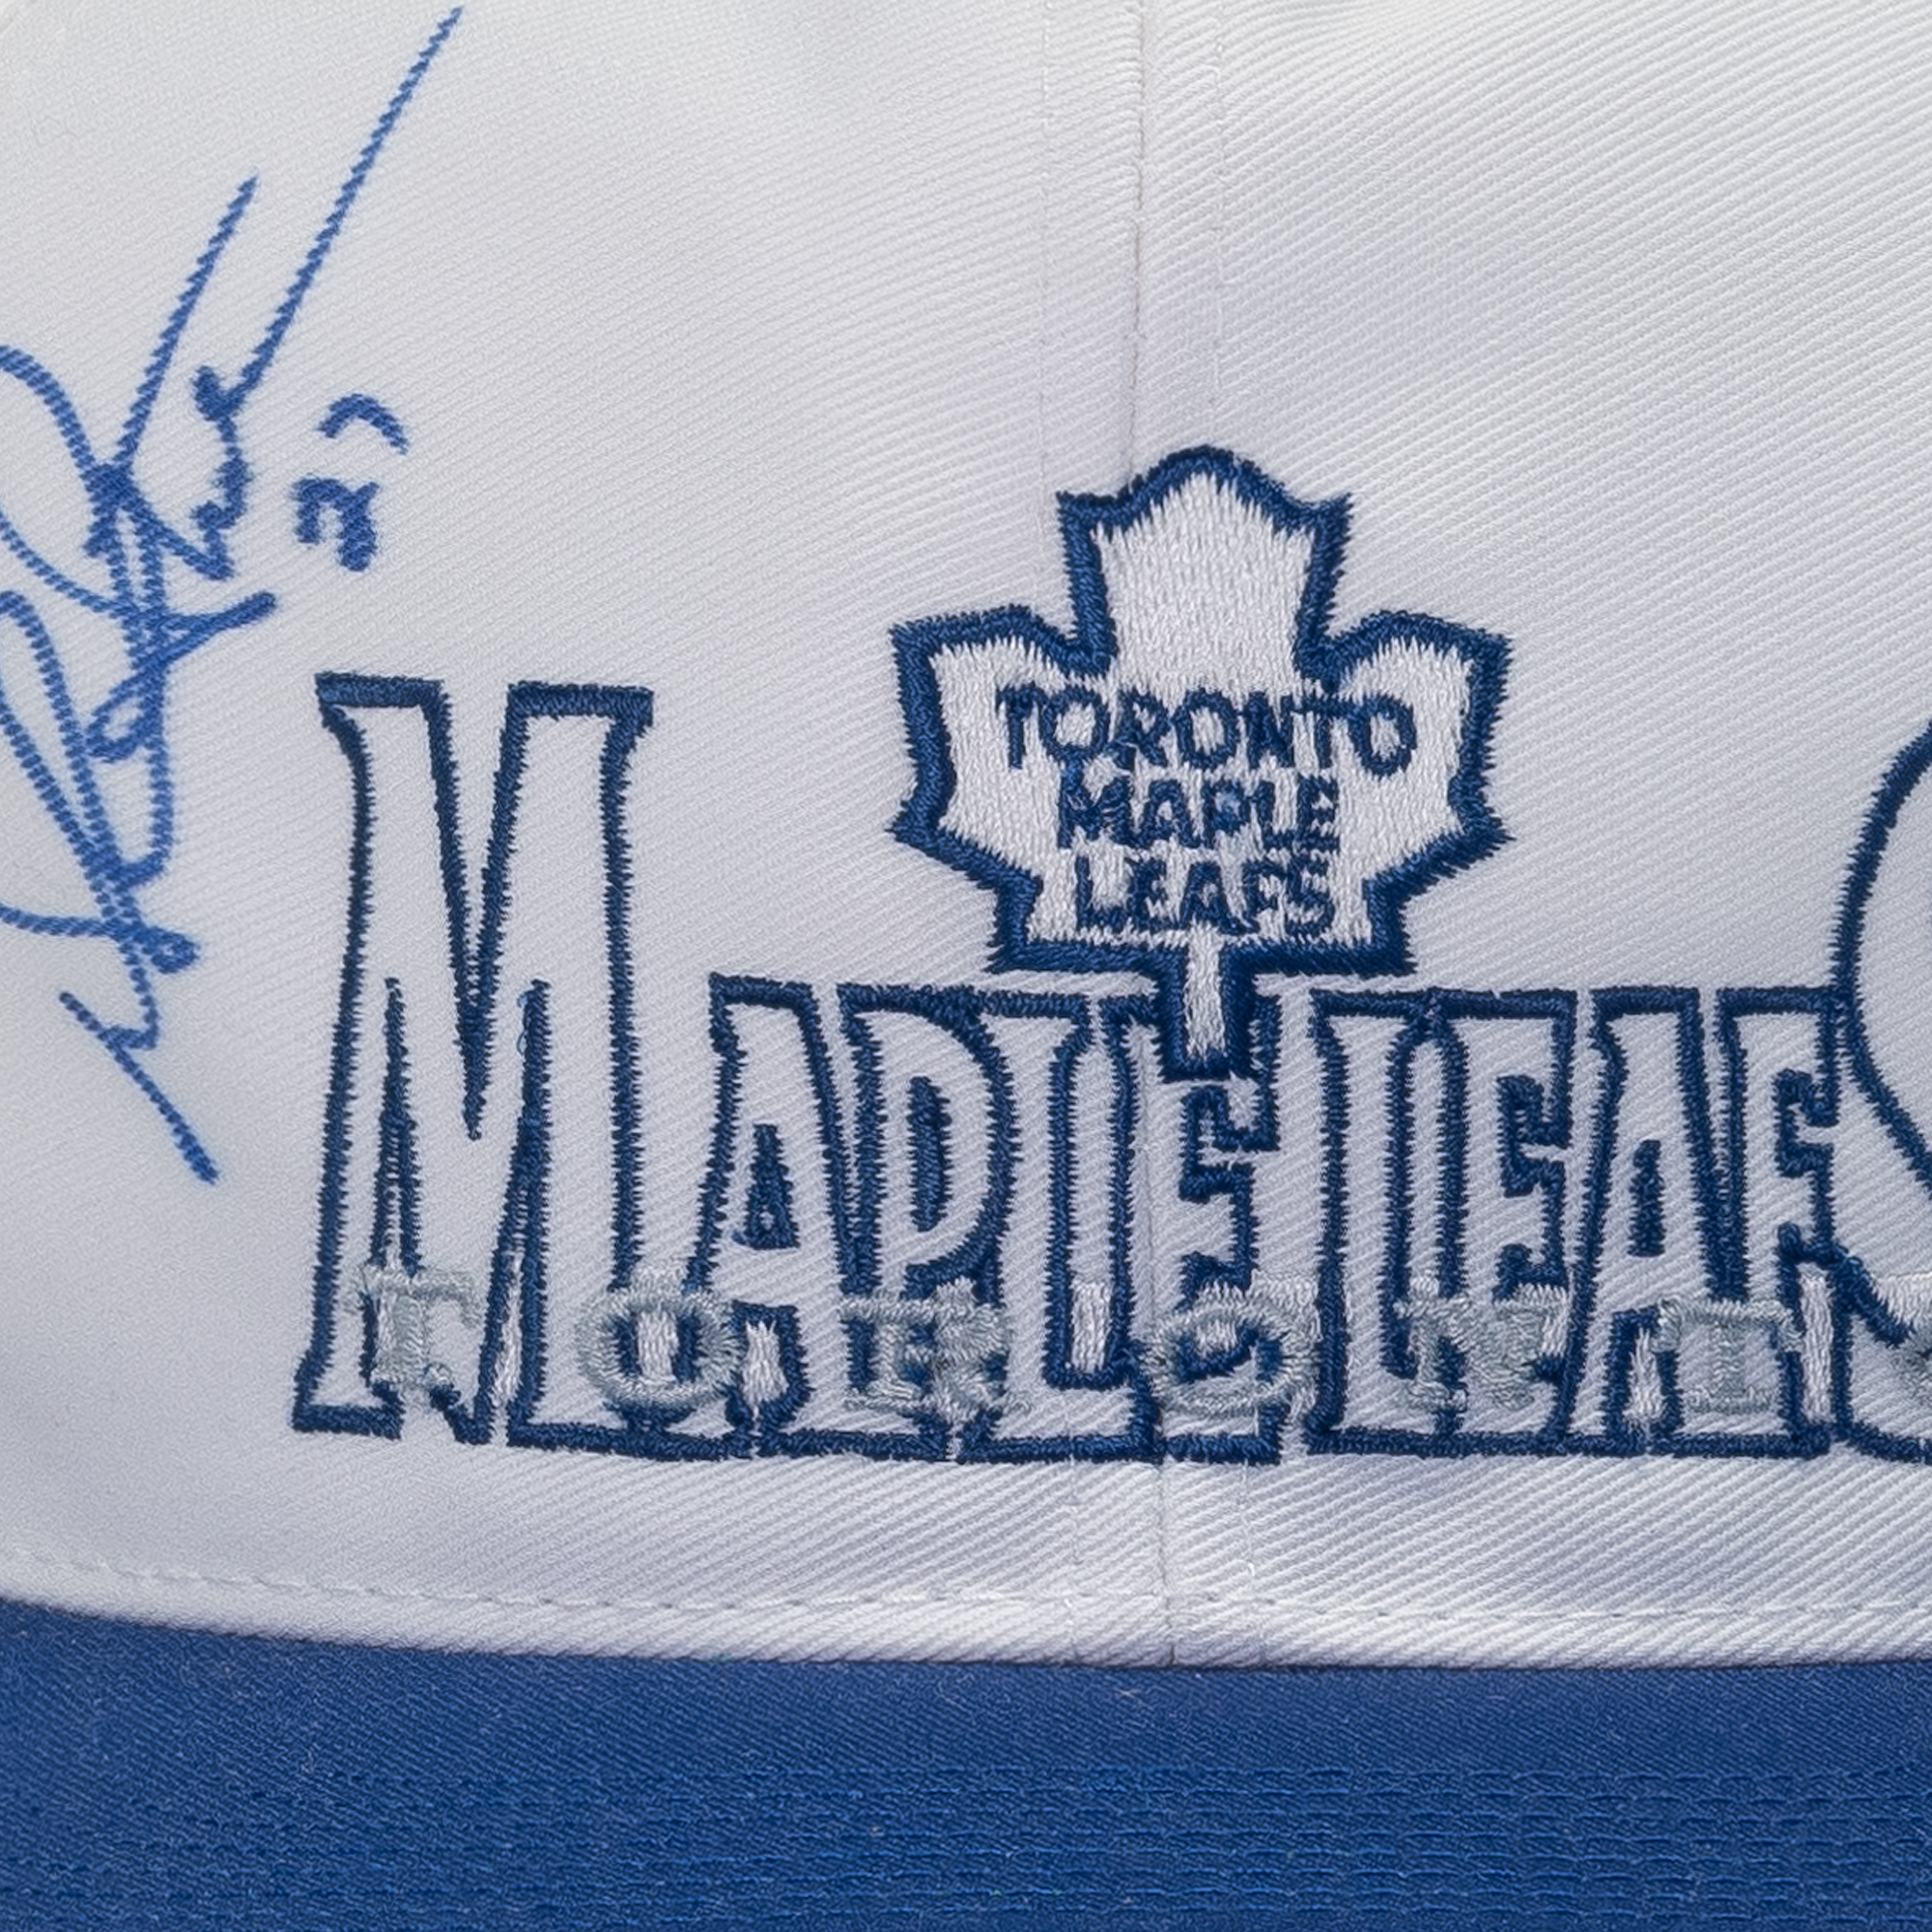 Darryl Sittler Signed Toronto Maple Leafs "The Game" Snapback White-PLUS